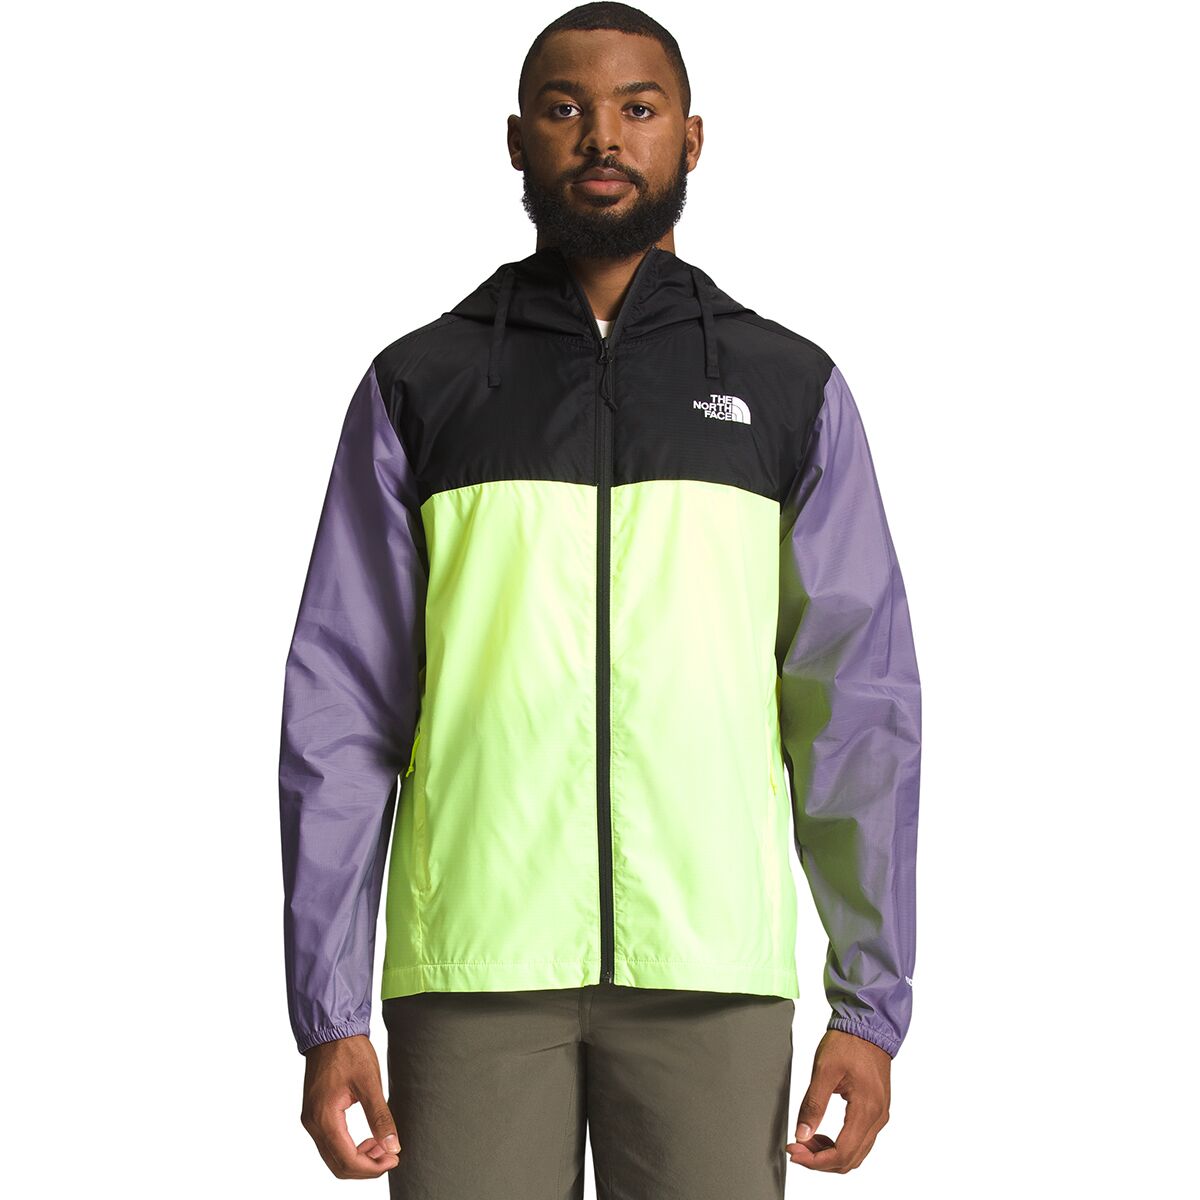 The North Face Cyclone Jacket - Men's